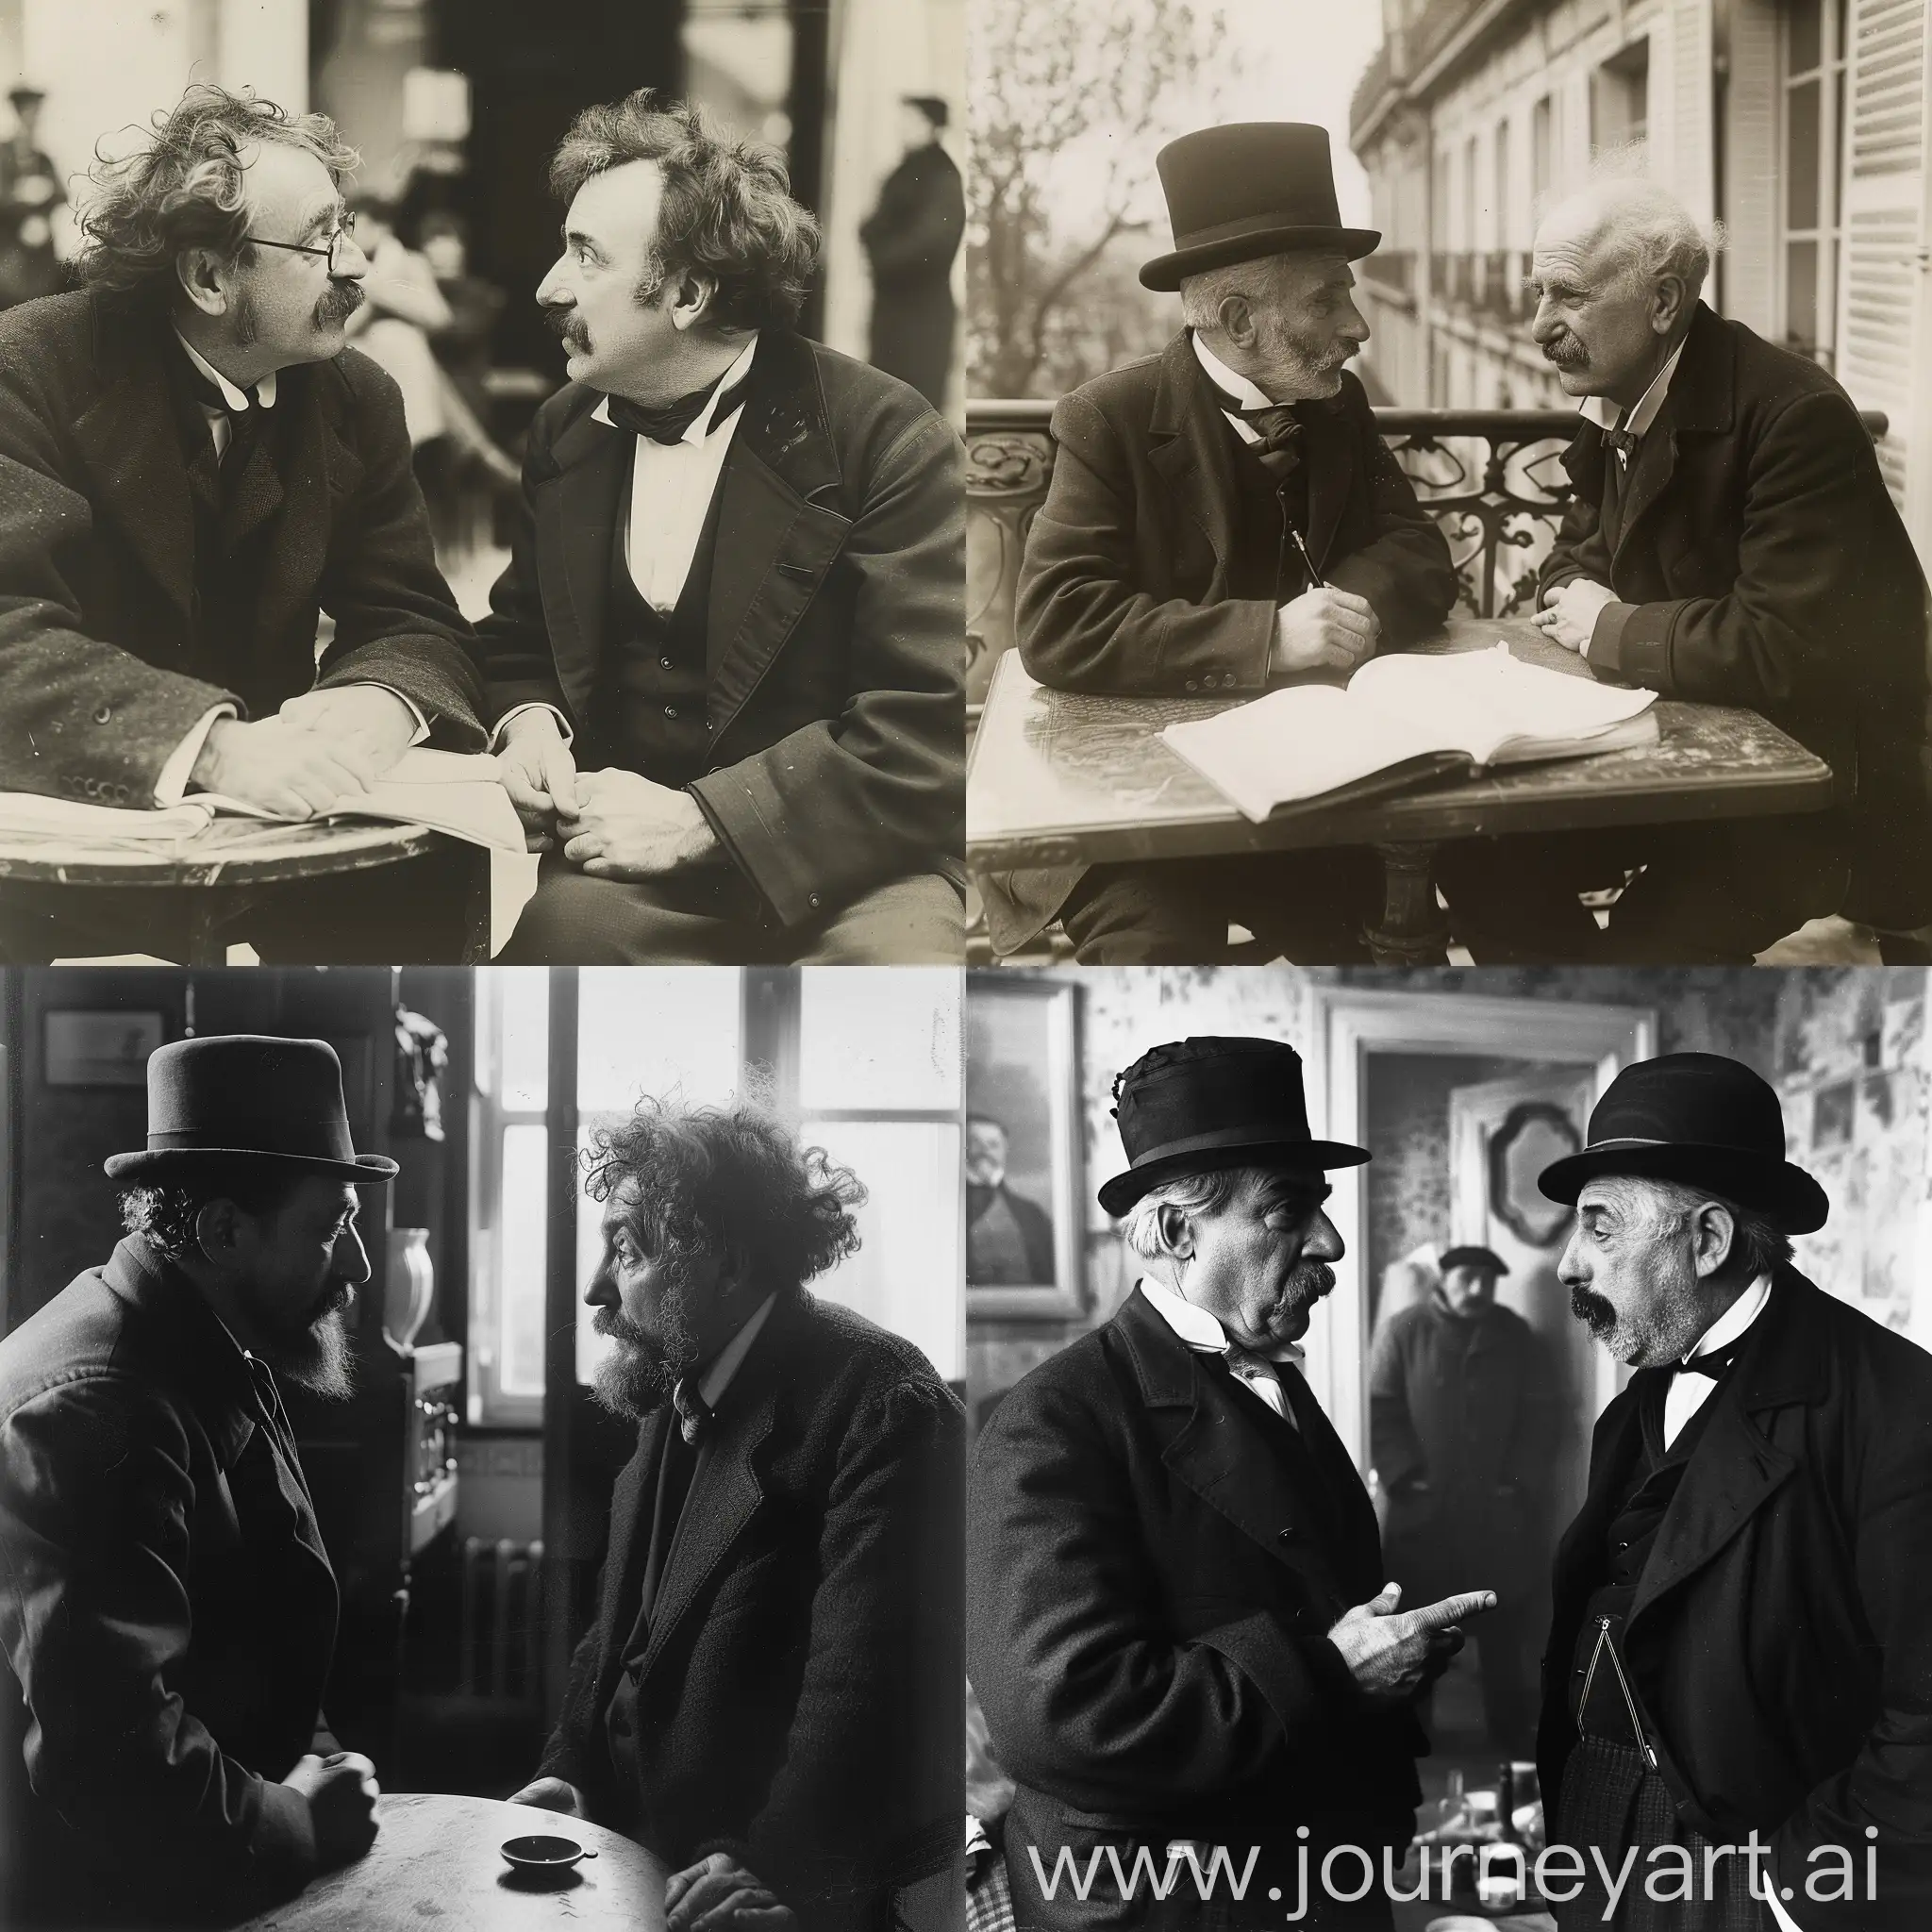 Robert desnos and Alfred Jarry discussing about literature in france
